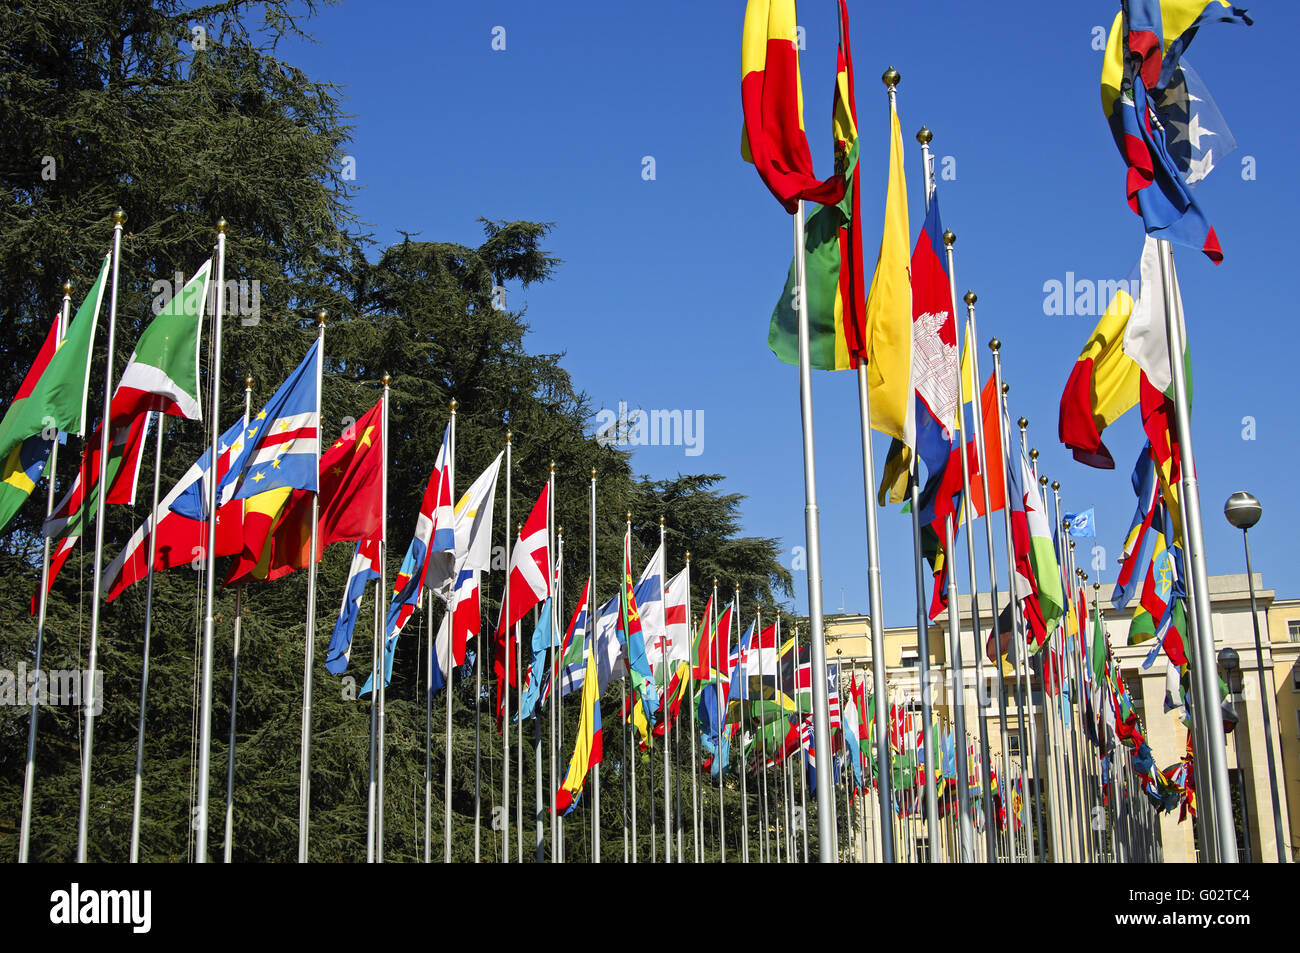 Flags from around the world Stock Photo